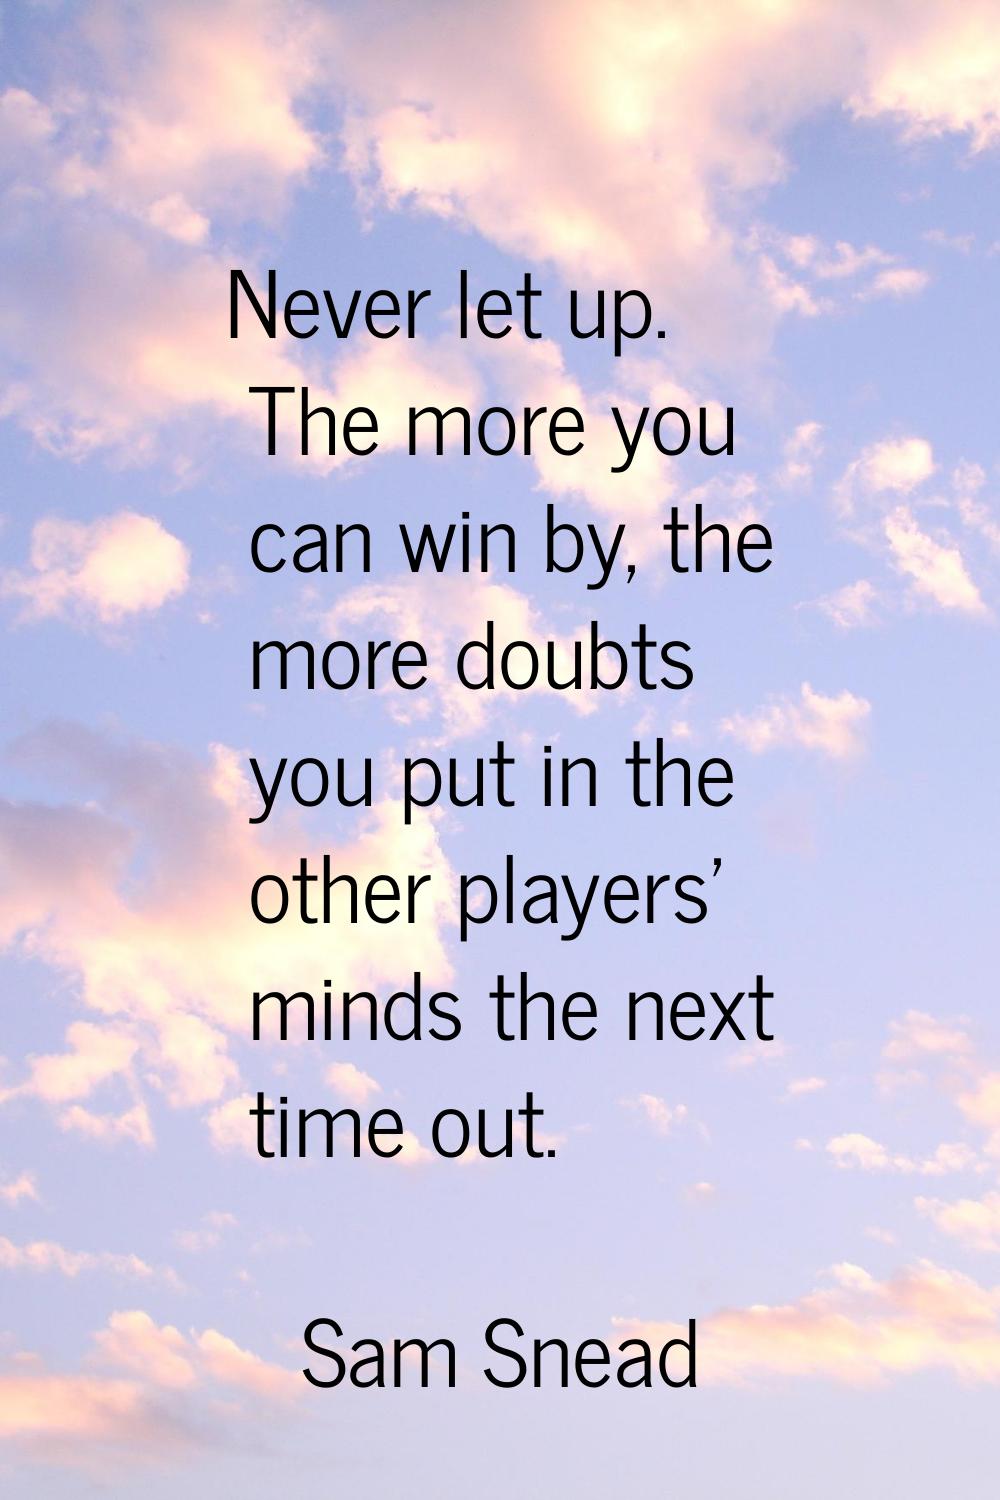 Never let up. The more you can win by, the more doubts you put in the other players' minds the next